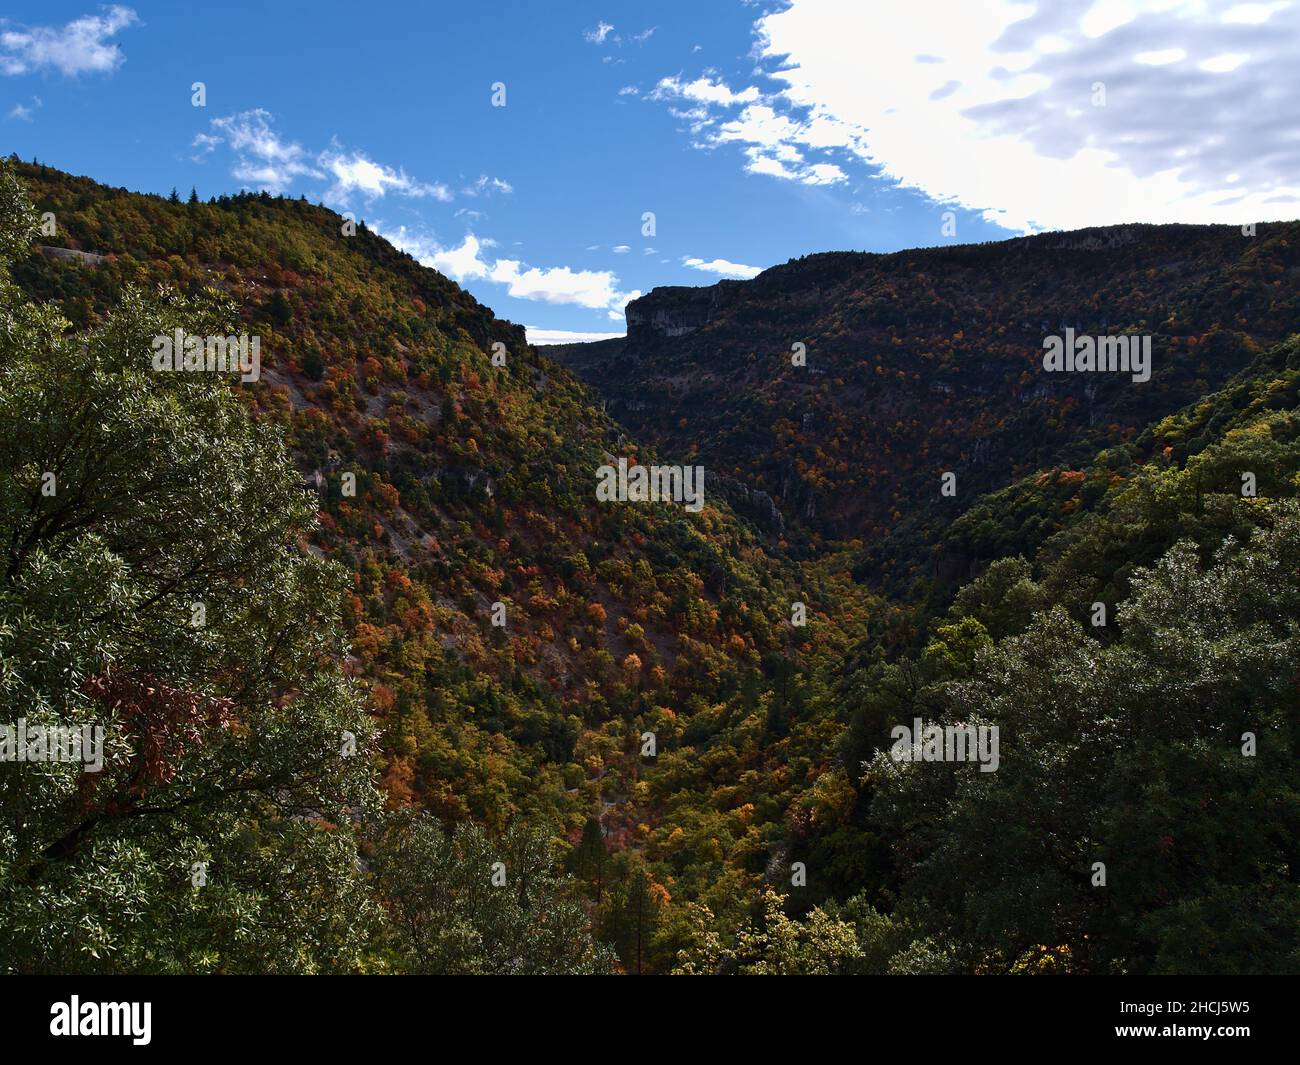 View of popular gorge Gorges de la Nesque with limestone rocks in the subalpine Vaucluse Mountains in Provence region, France on sunny day in autumn. Stock Photo